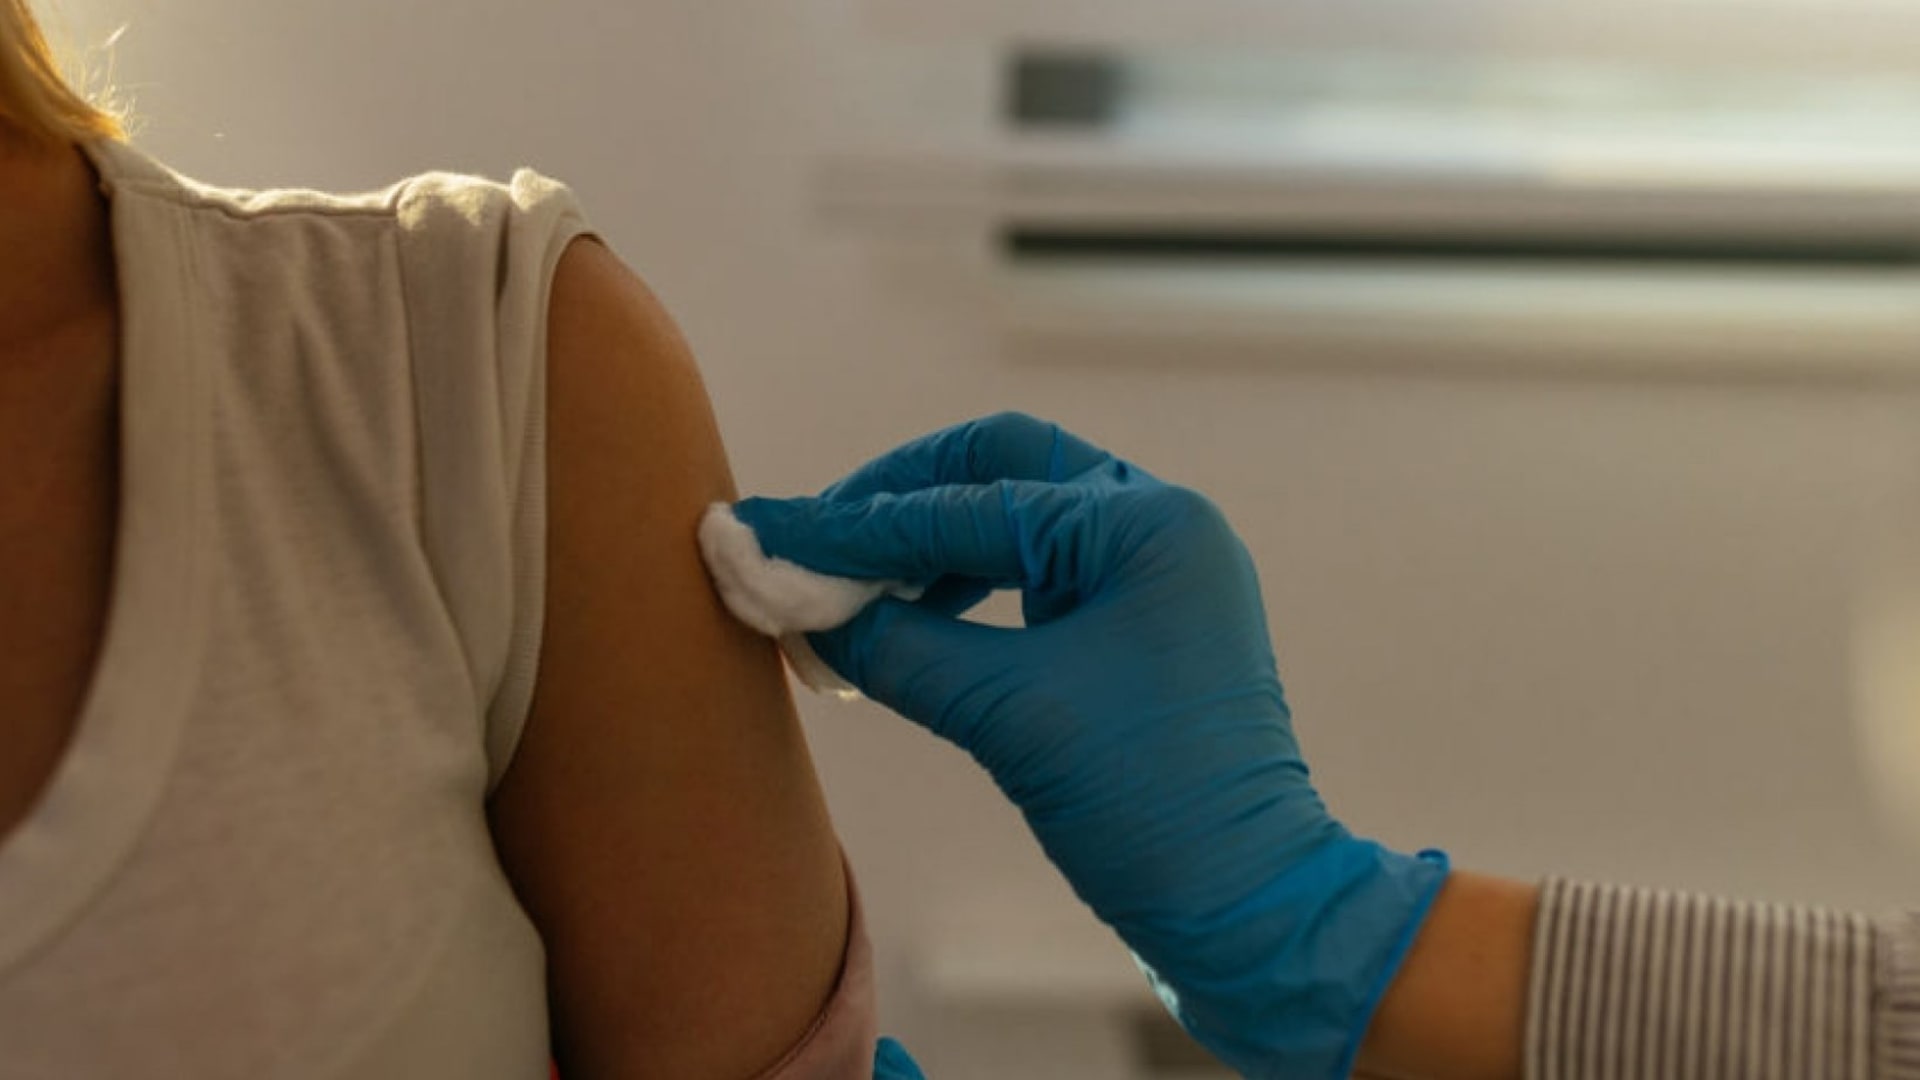 Breaking: OSHA Finally Releases Vaccination and Testing Rules for Businesses